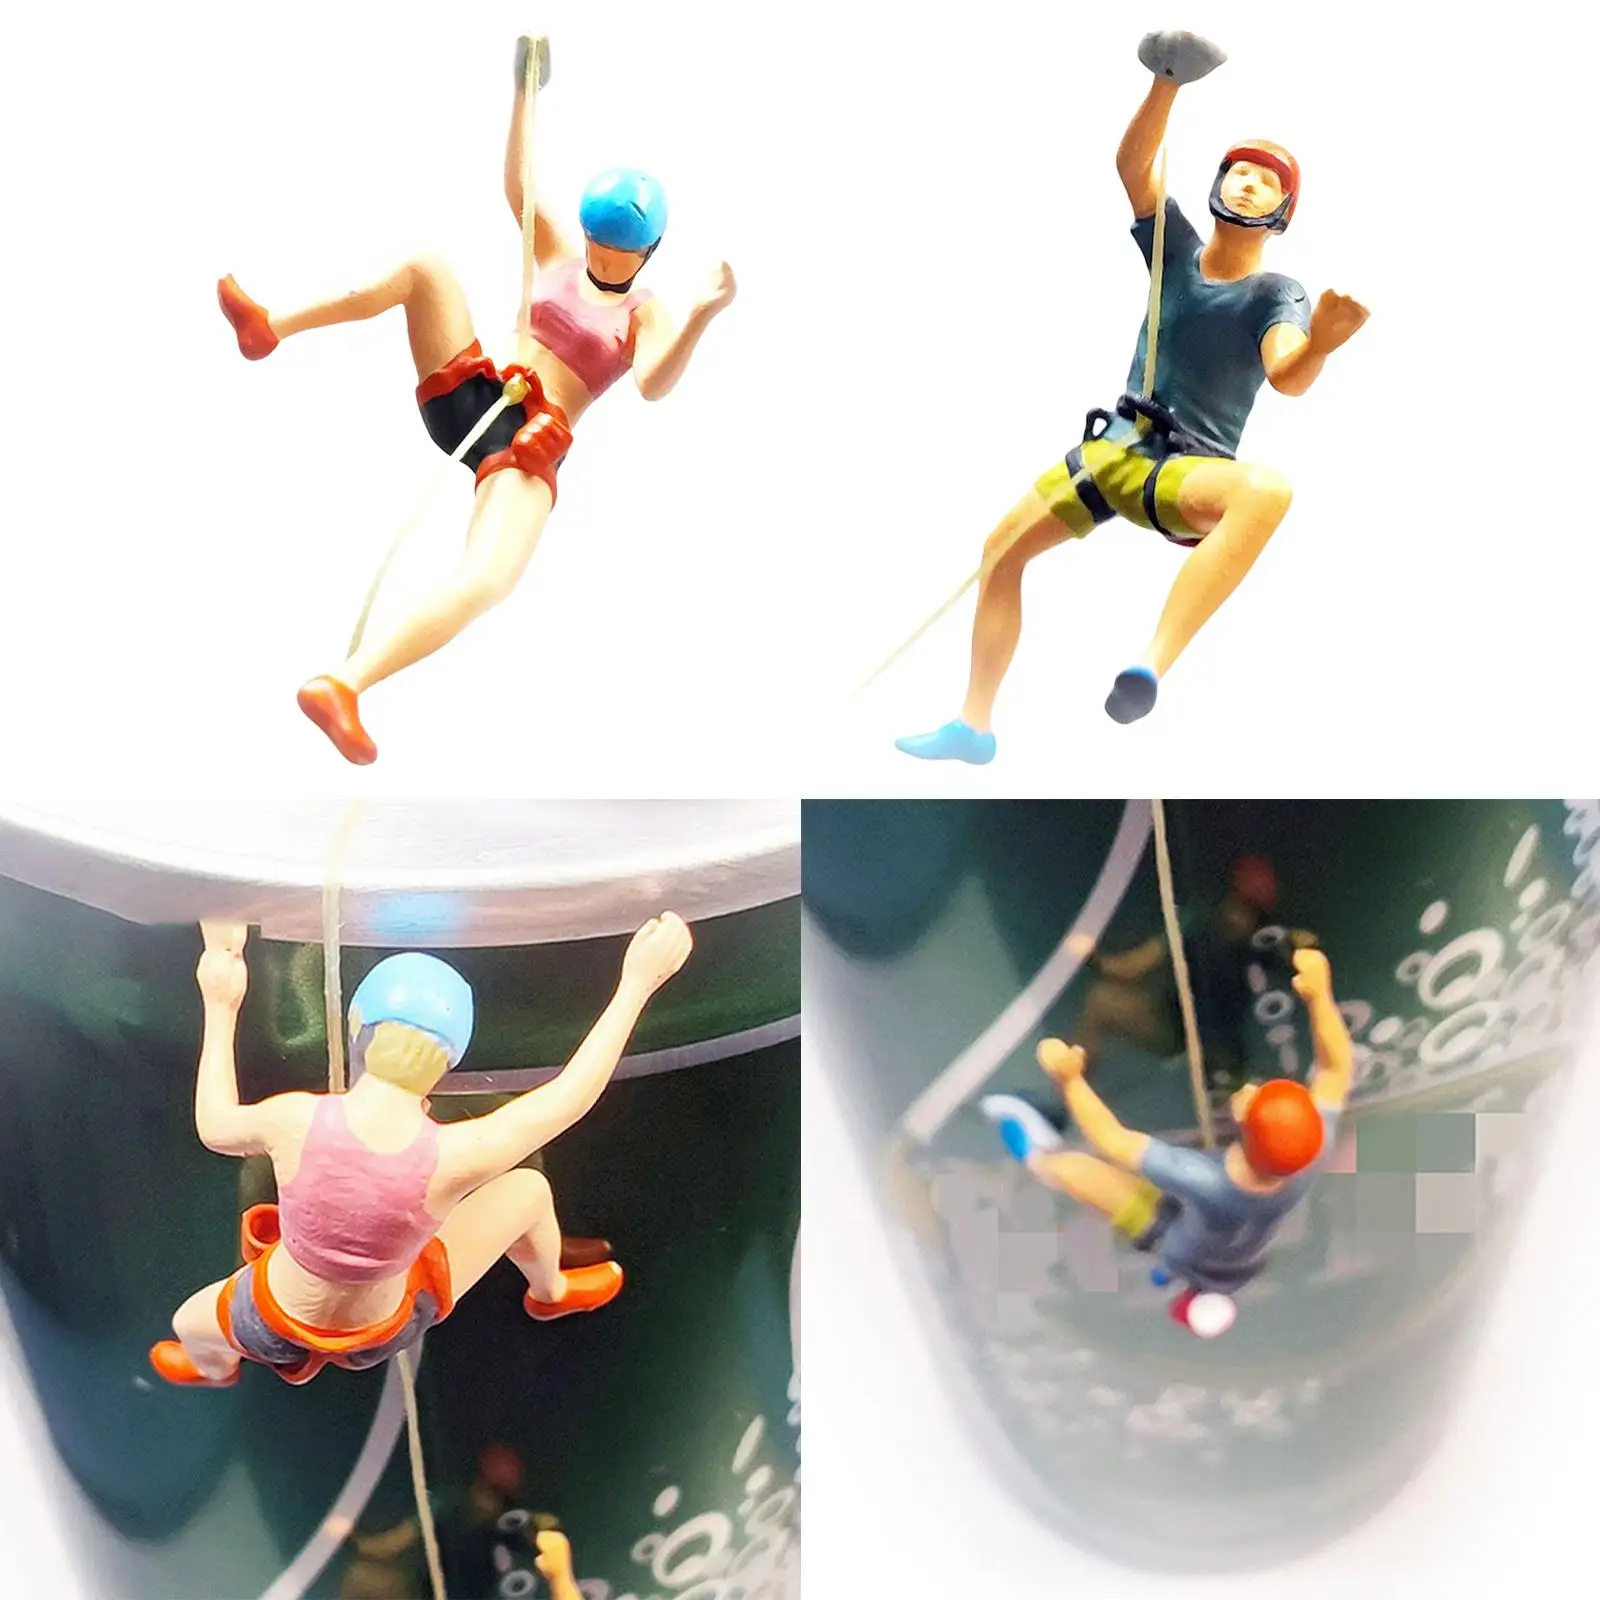 Mounting Miniature Scene People action/87 Painted Figures for DIY Projects DIY Scene